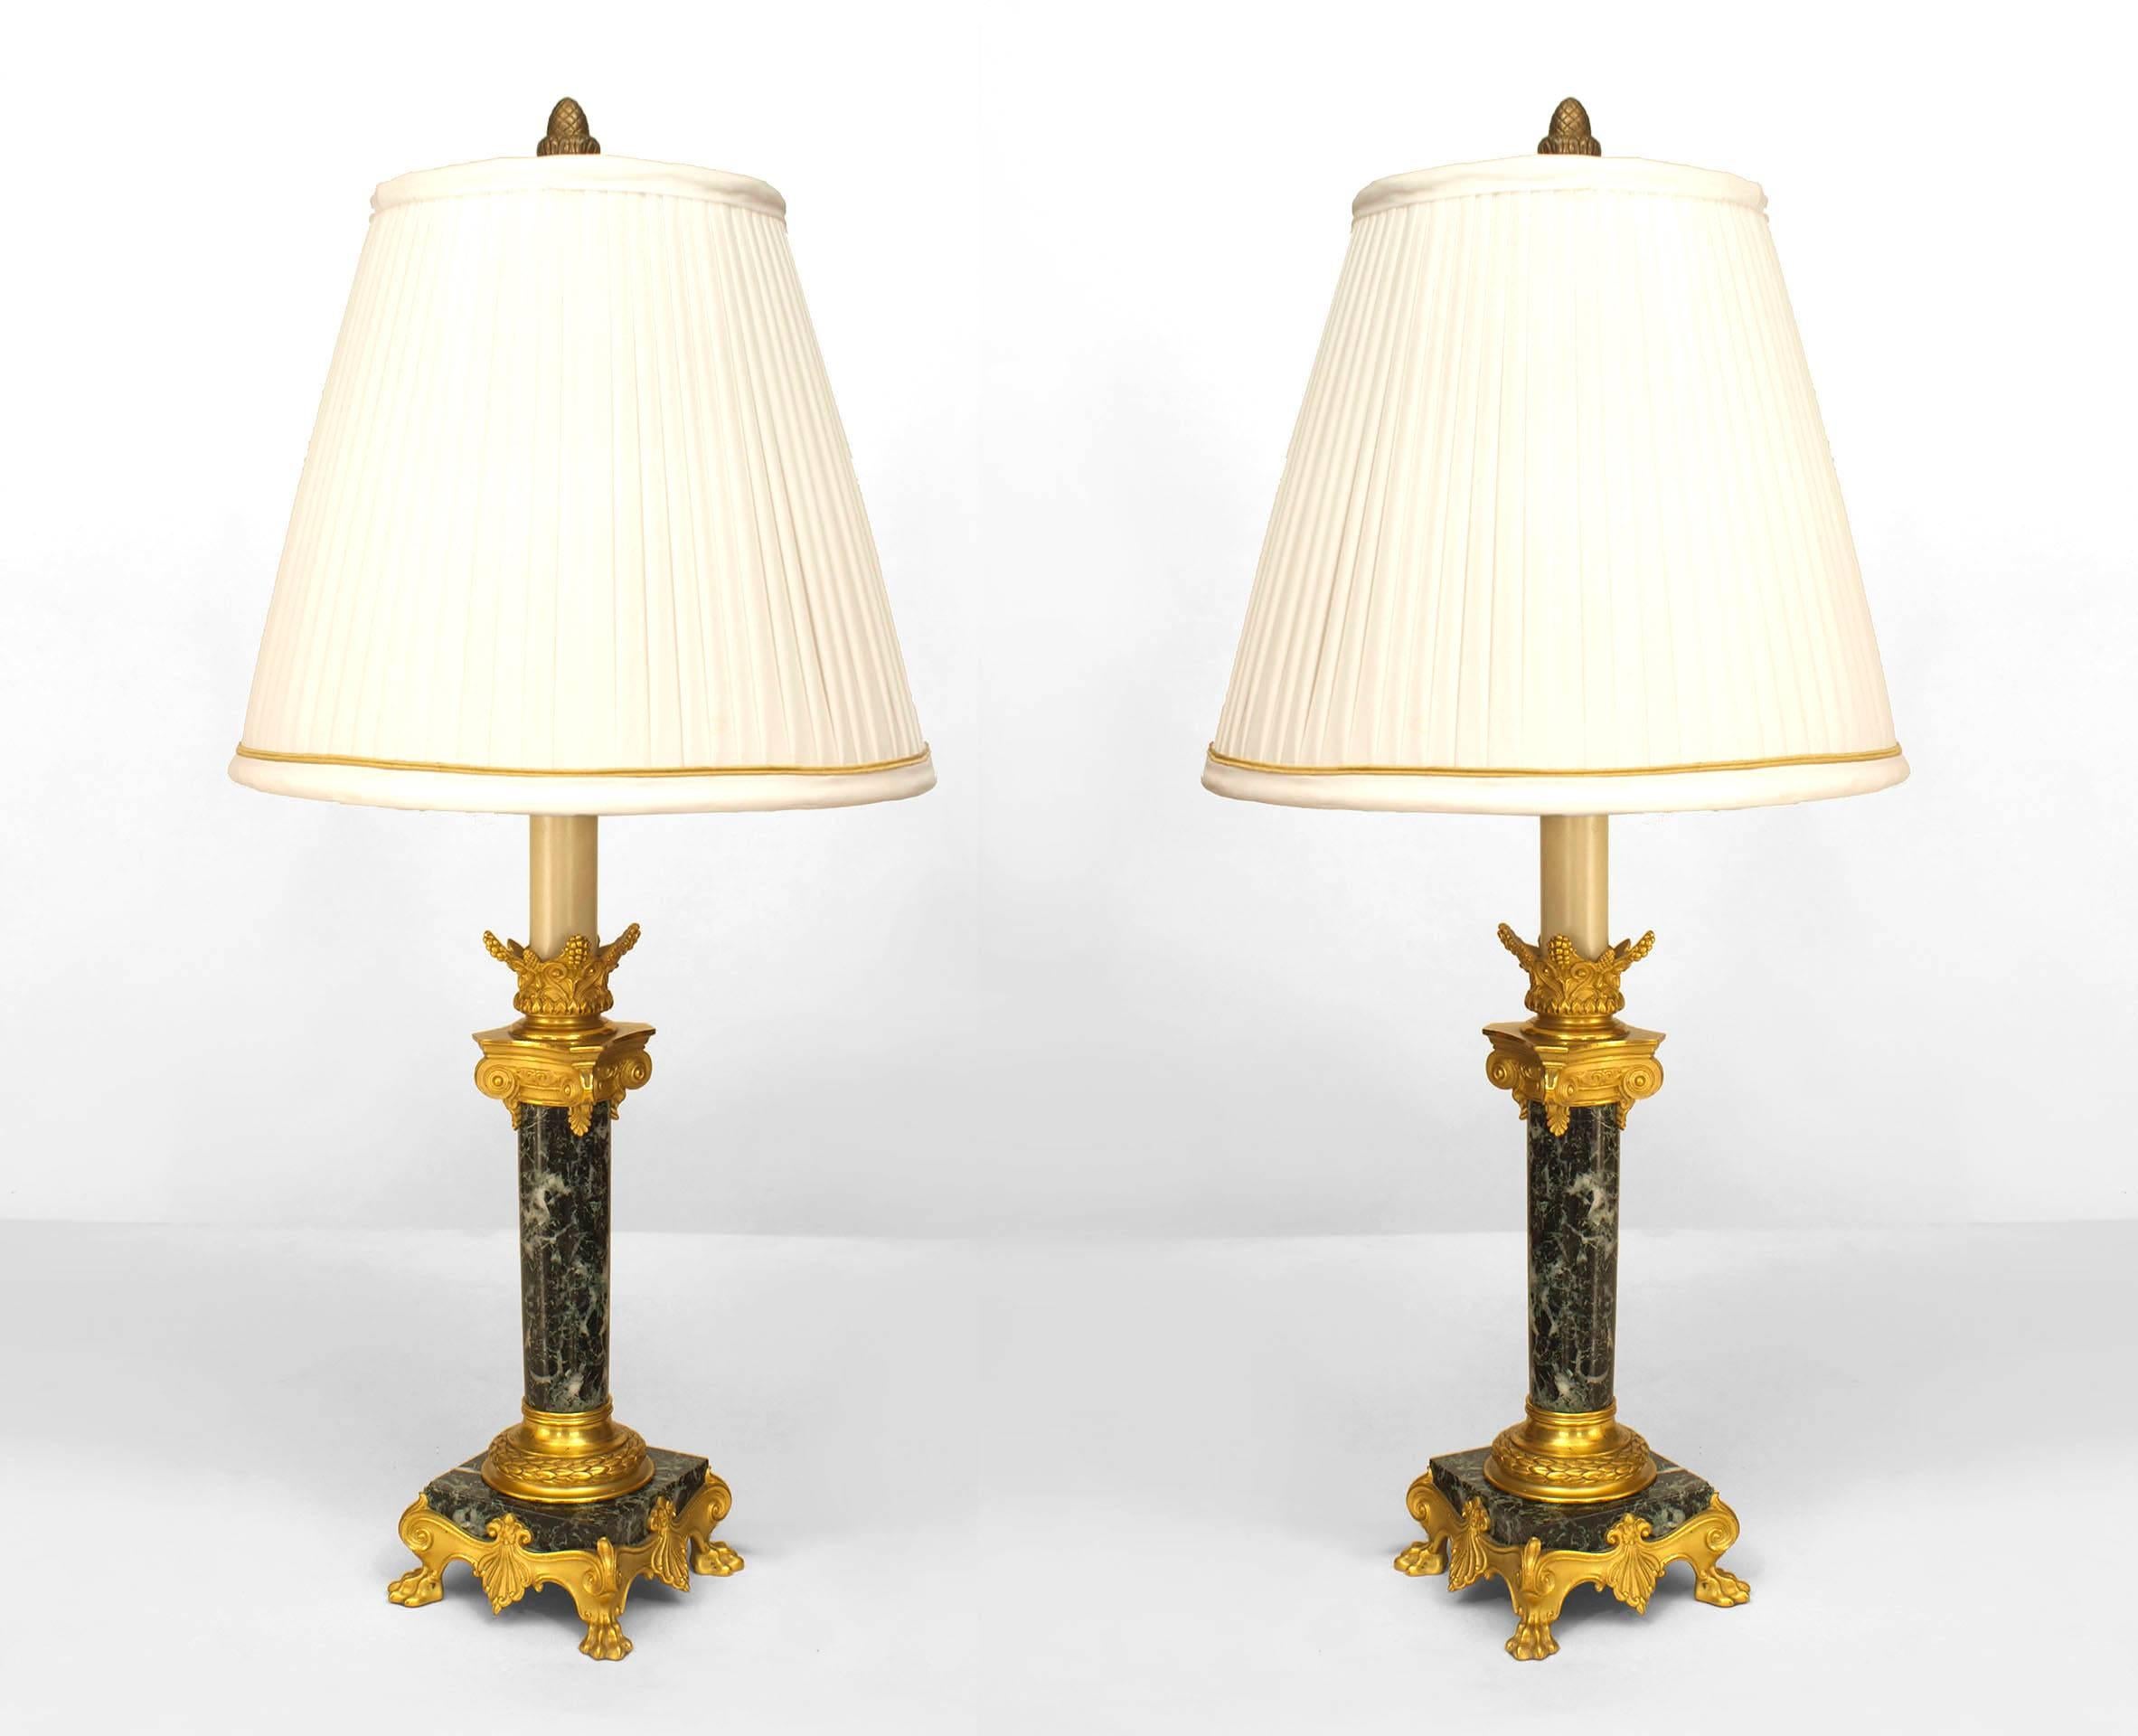 Pair of French Empire style (19th Century) green marble column candlestick lamps with bronze dore trimmed capital and square base (signed F. BARBEDIENNE) (PRICED AS Pair).
